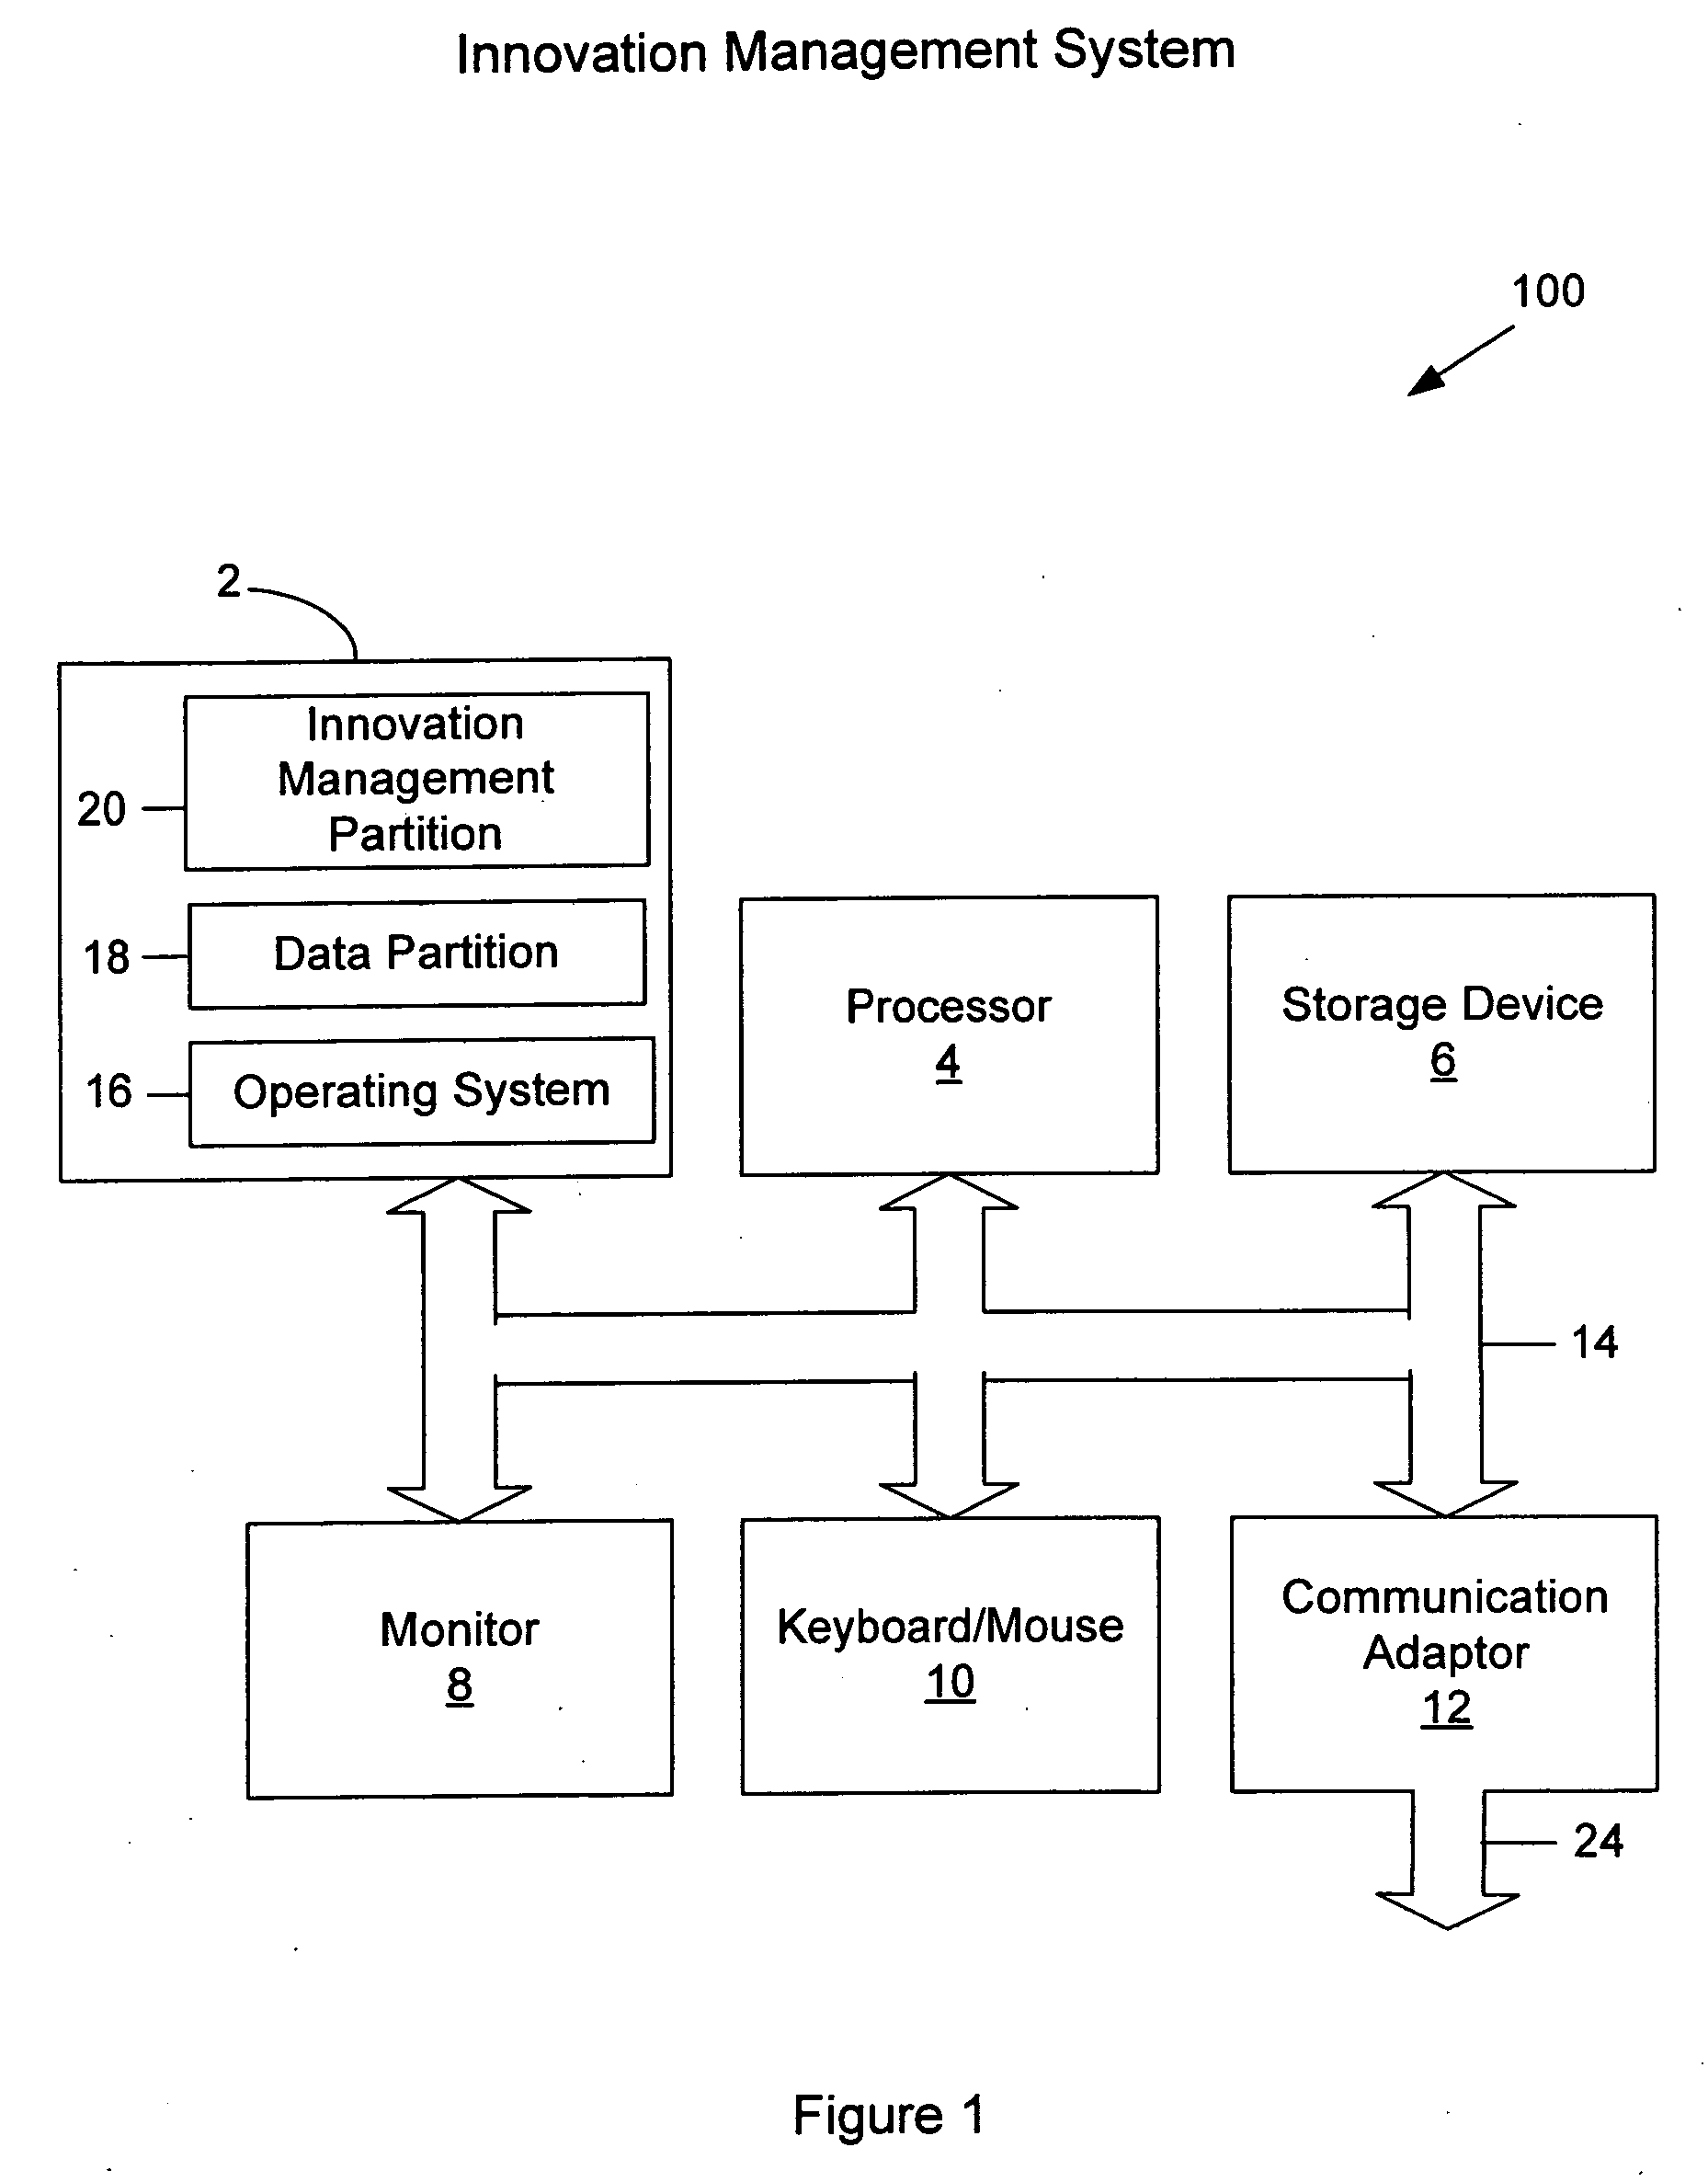 Innovation management system, apparatus, and method